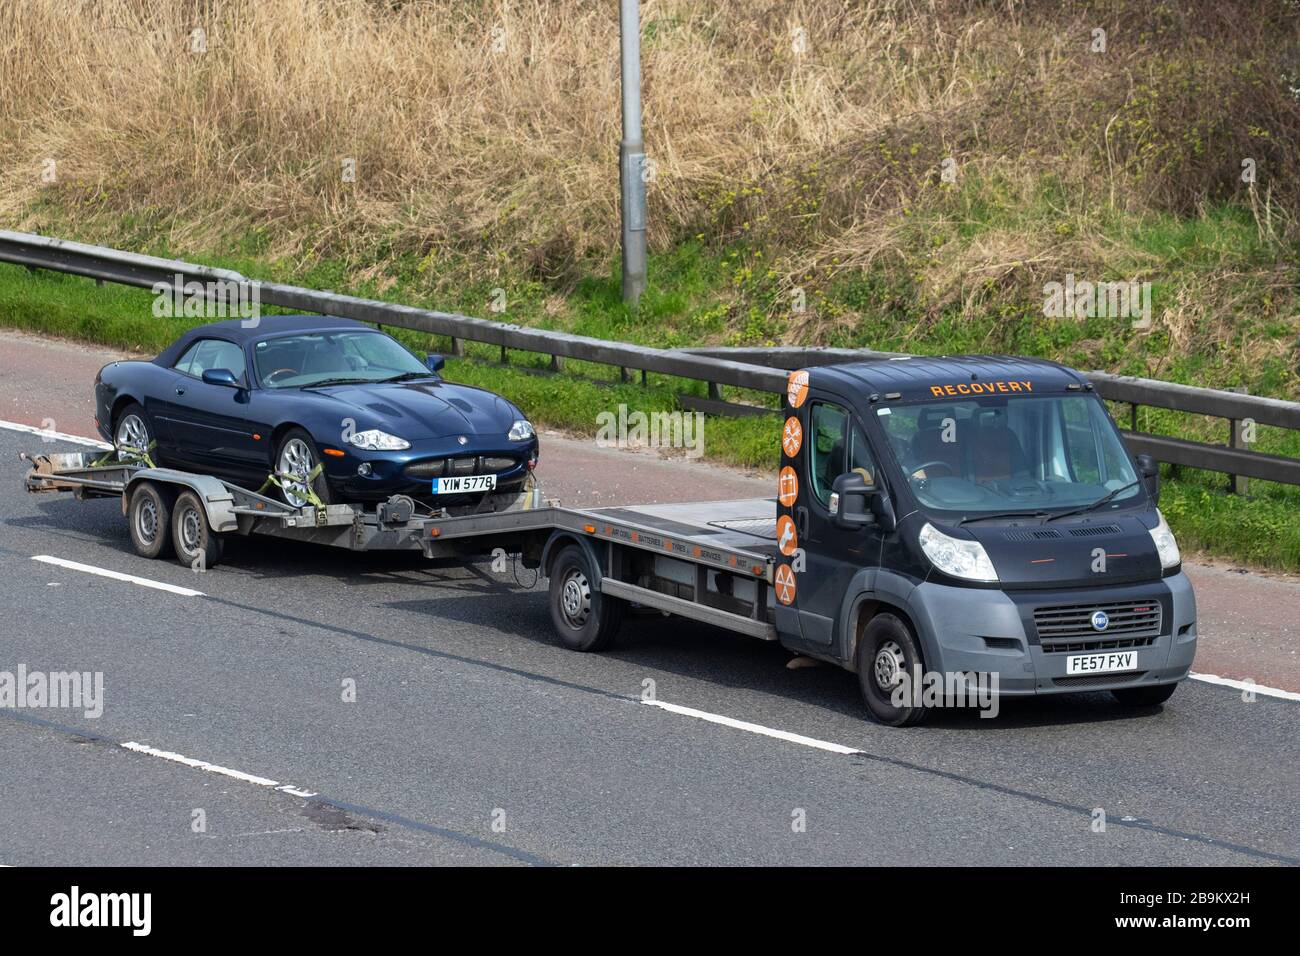 Van recovery truck carrying broken down 1999 Jaguar XKR Auto; Side view of Fiat Ducato 40 Maxi 160 M-Jet rescue breakdown recovery roadside recovery lorry truck transporter transporting, driving along  M6, Chorley UK; Vehicular traffic, transport, modern on the 3 lane highway. Stock Photo